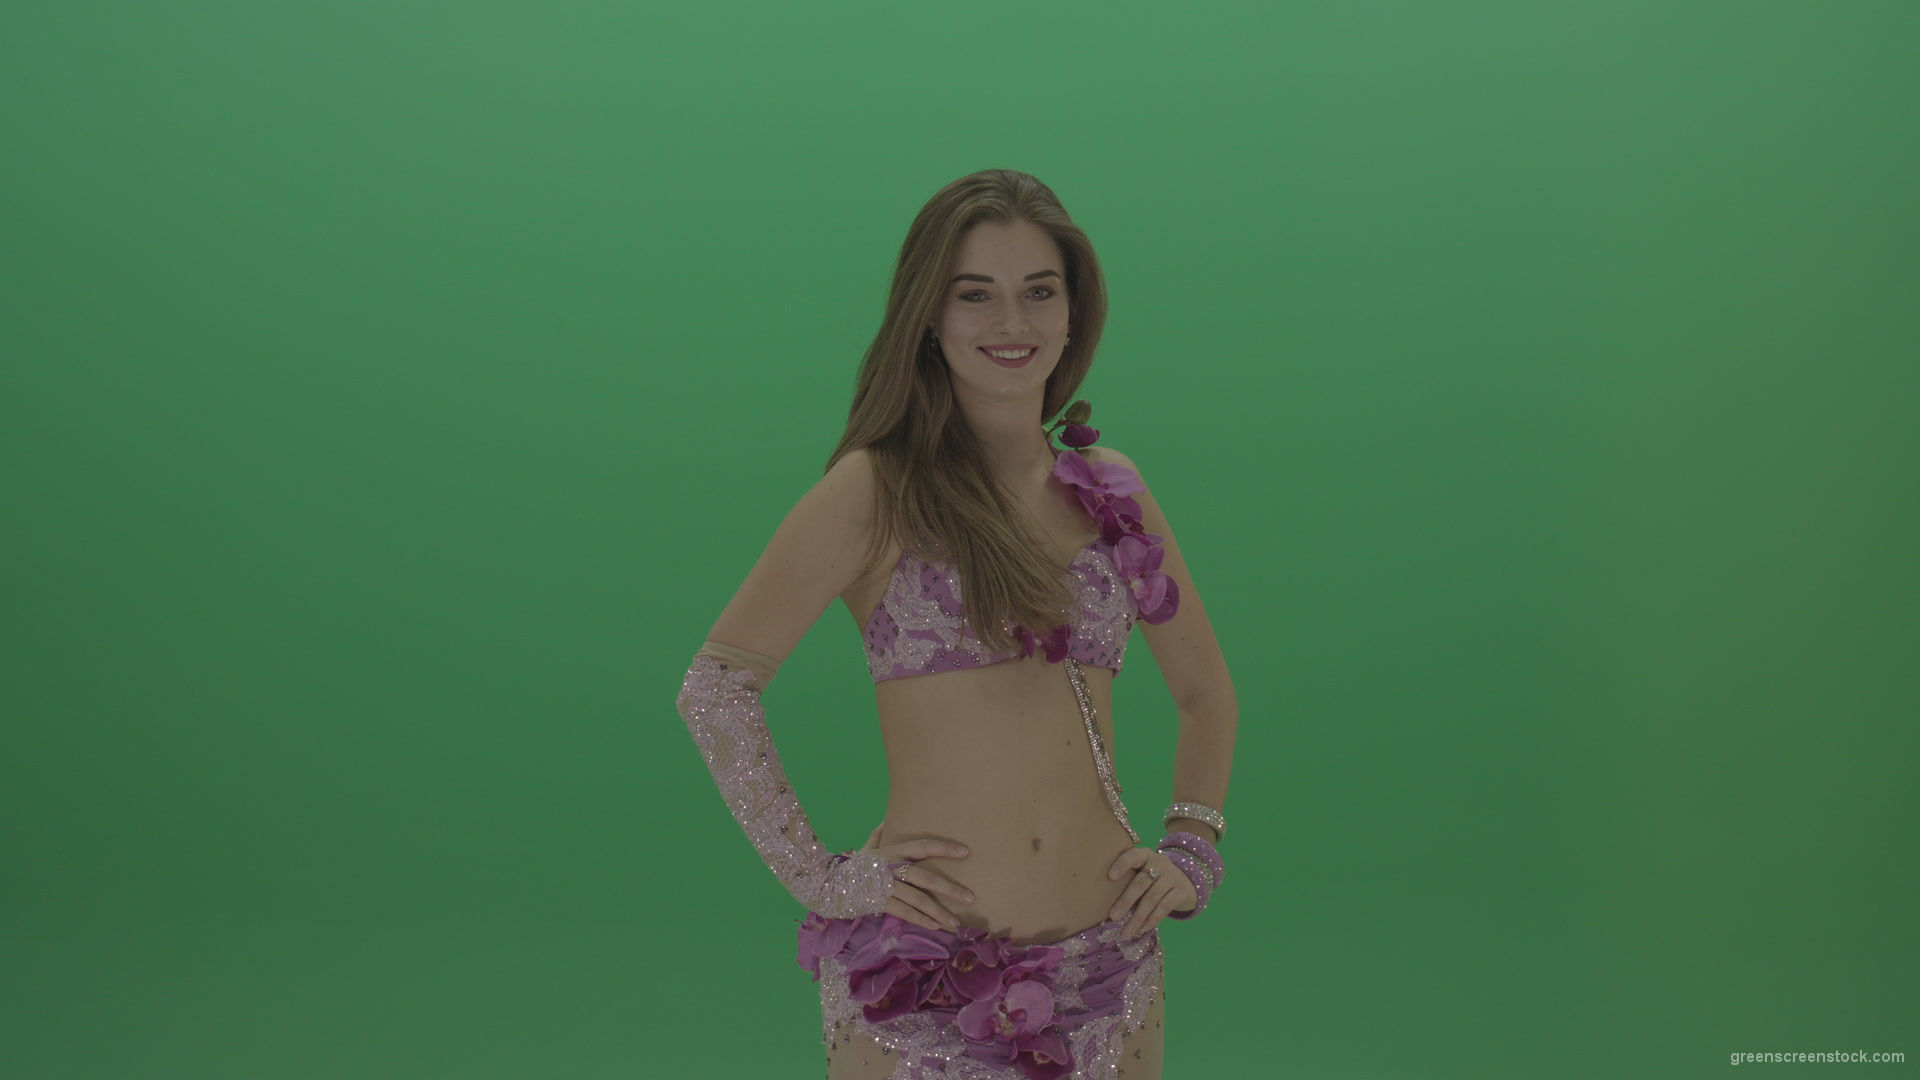 Beautiful-belly-dancer-in-purple-wear-winks-as-she-poses-over-green-screen-background_002 Green Screen Stock